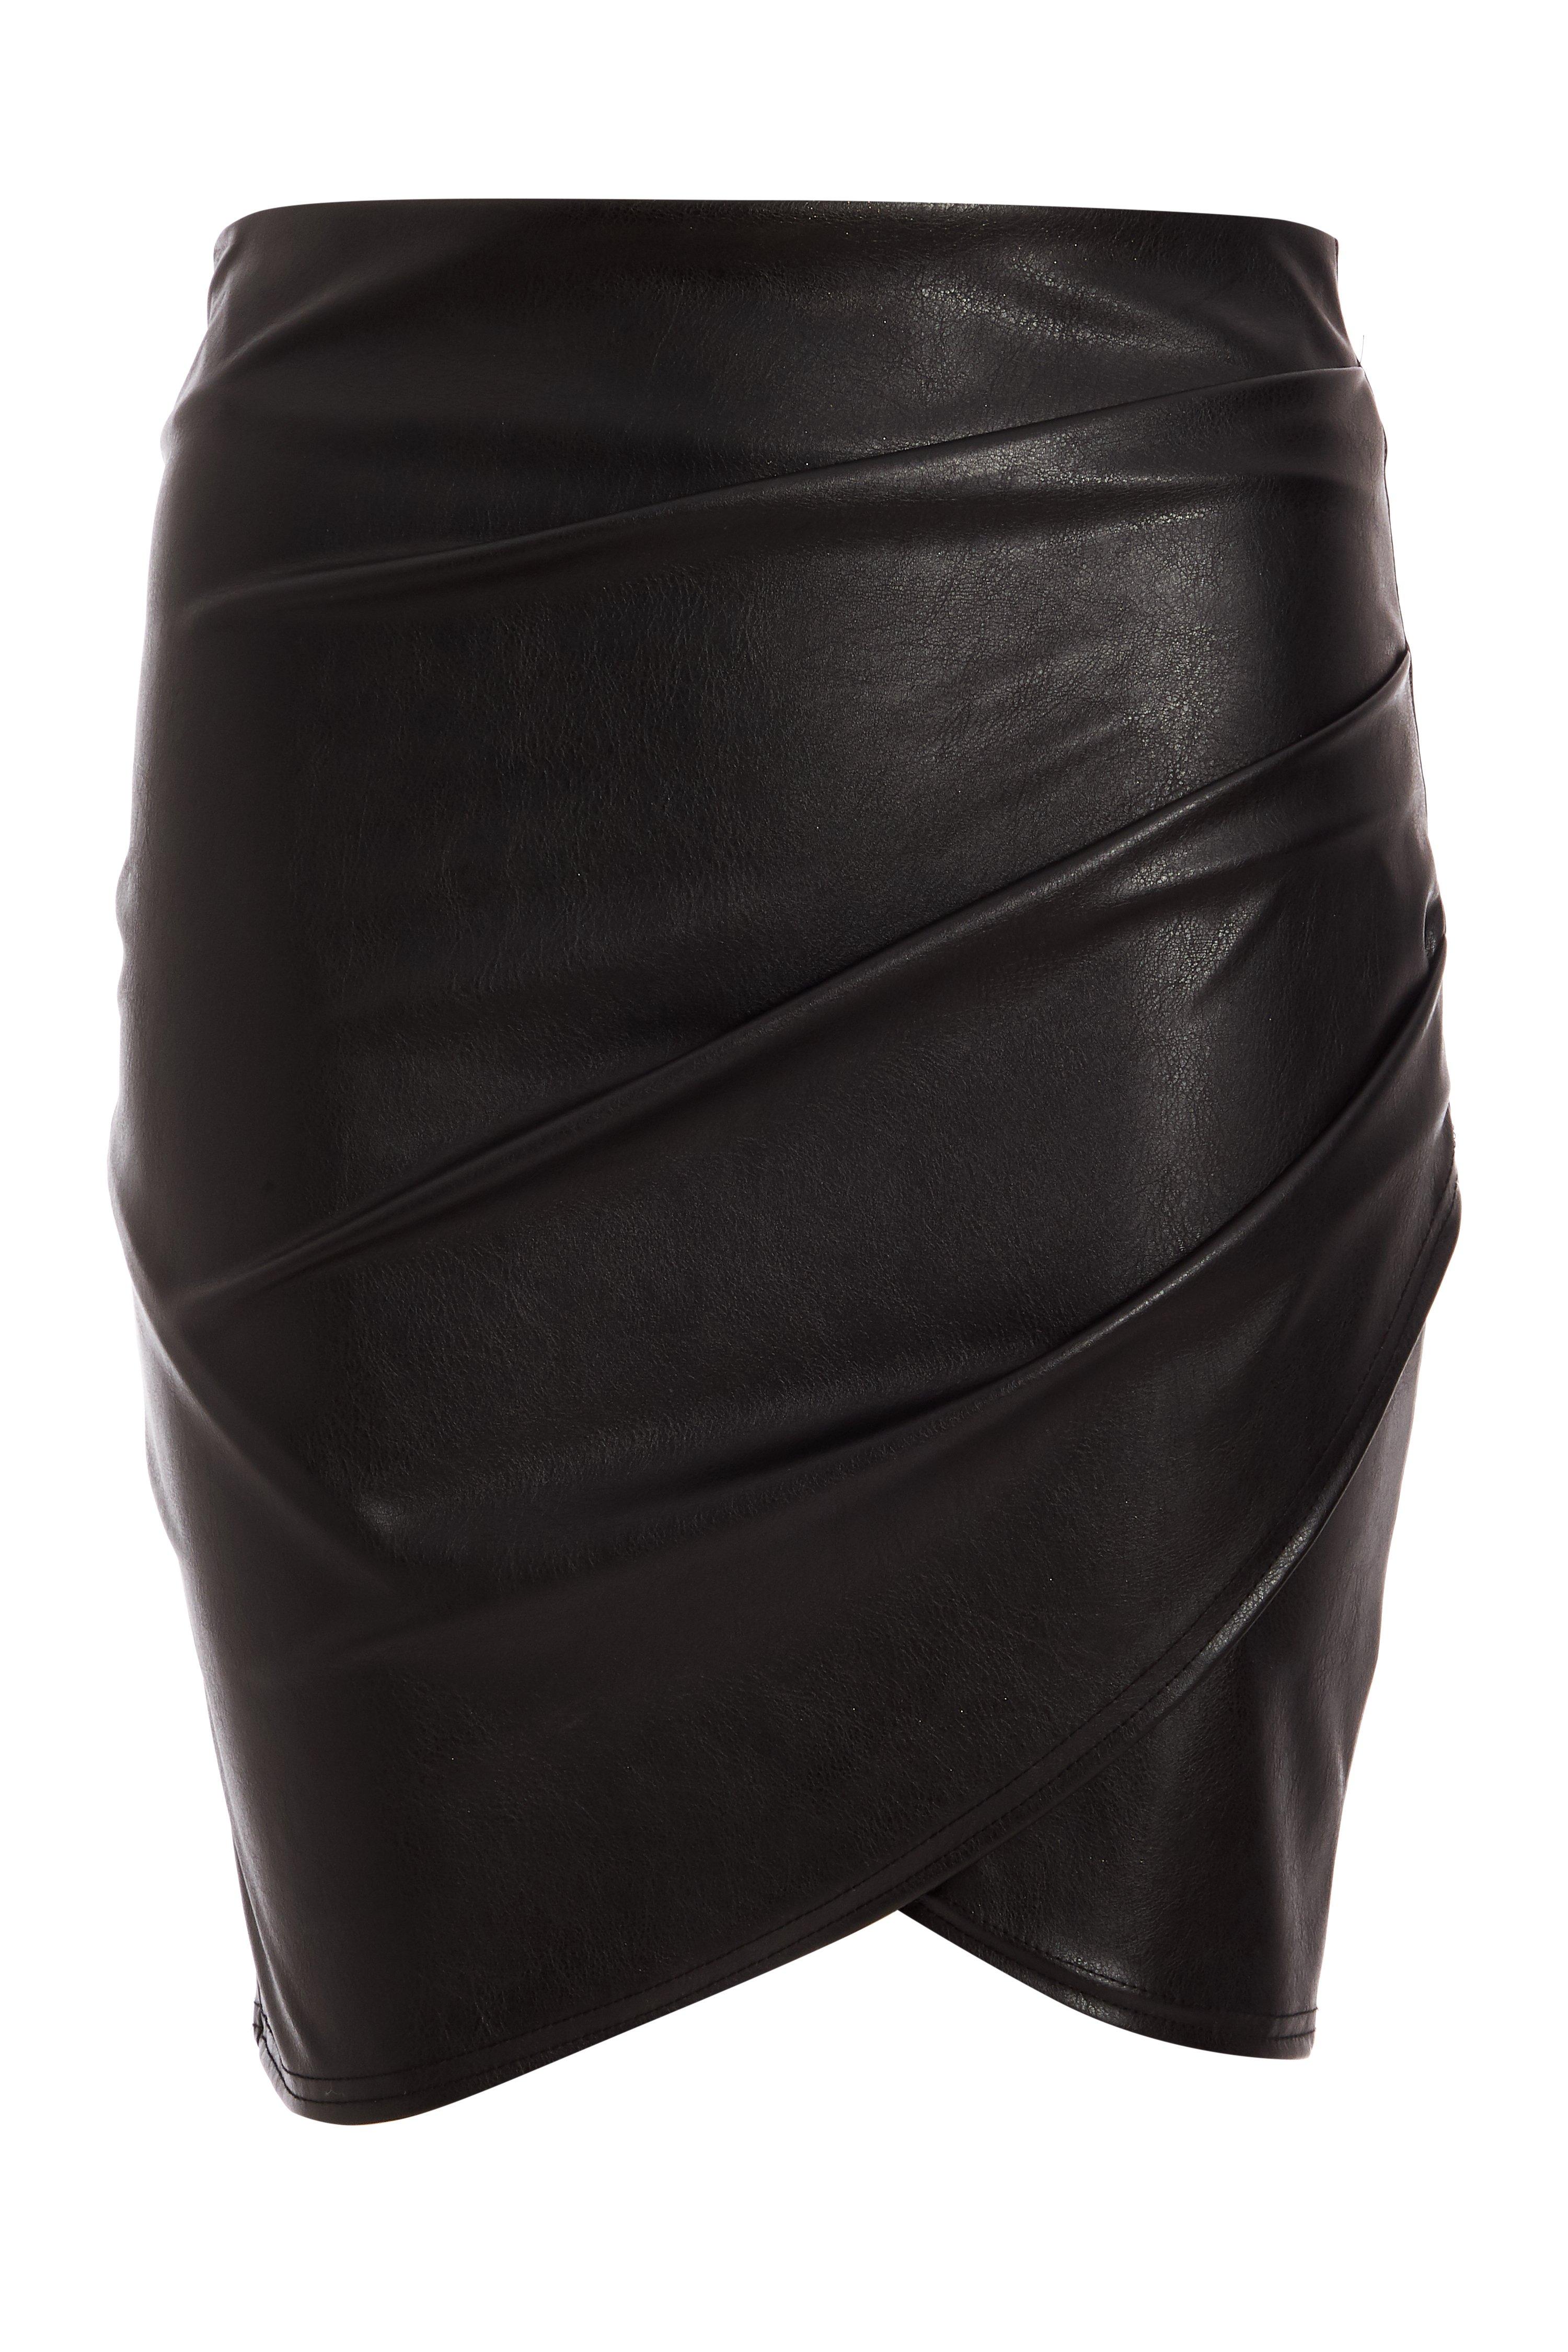 Black Faux Leather Ruched Mini Skirt - Quiz Clothing